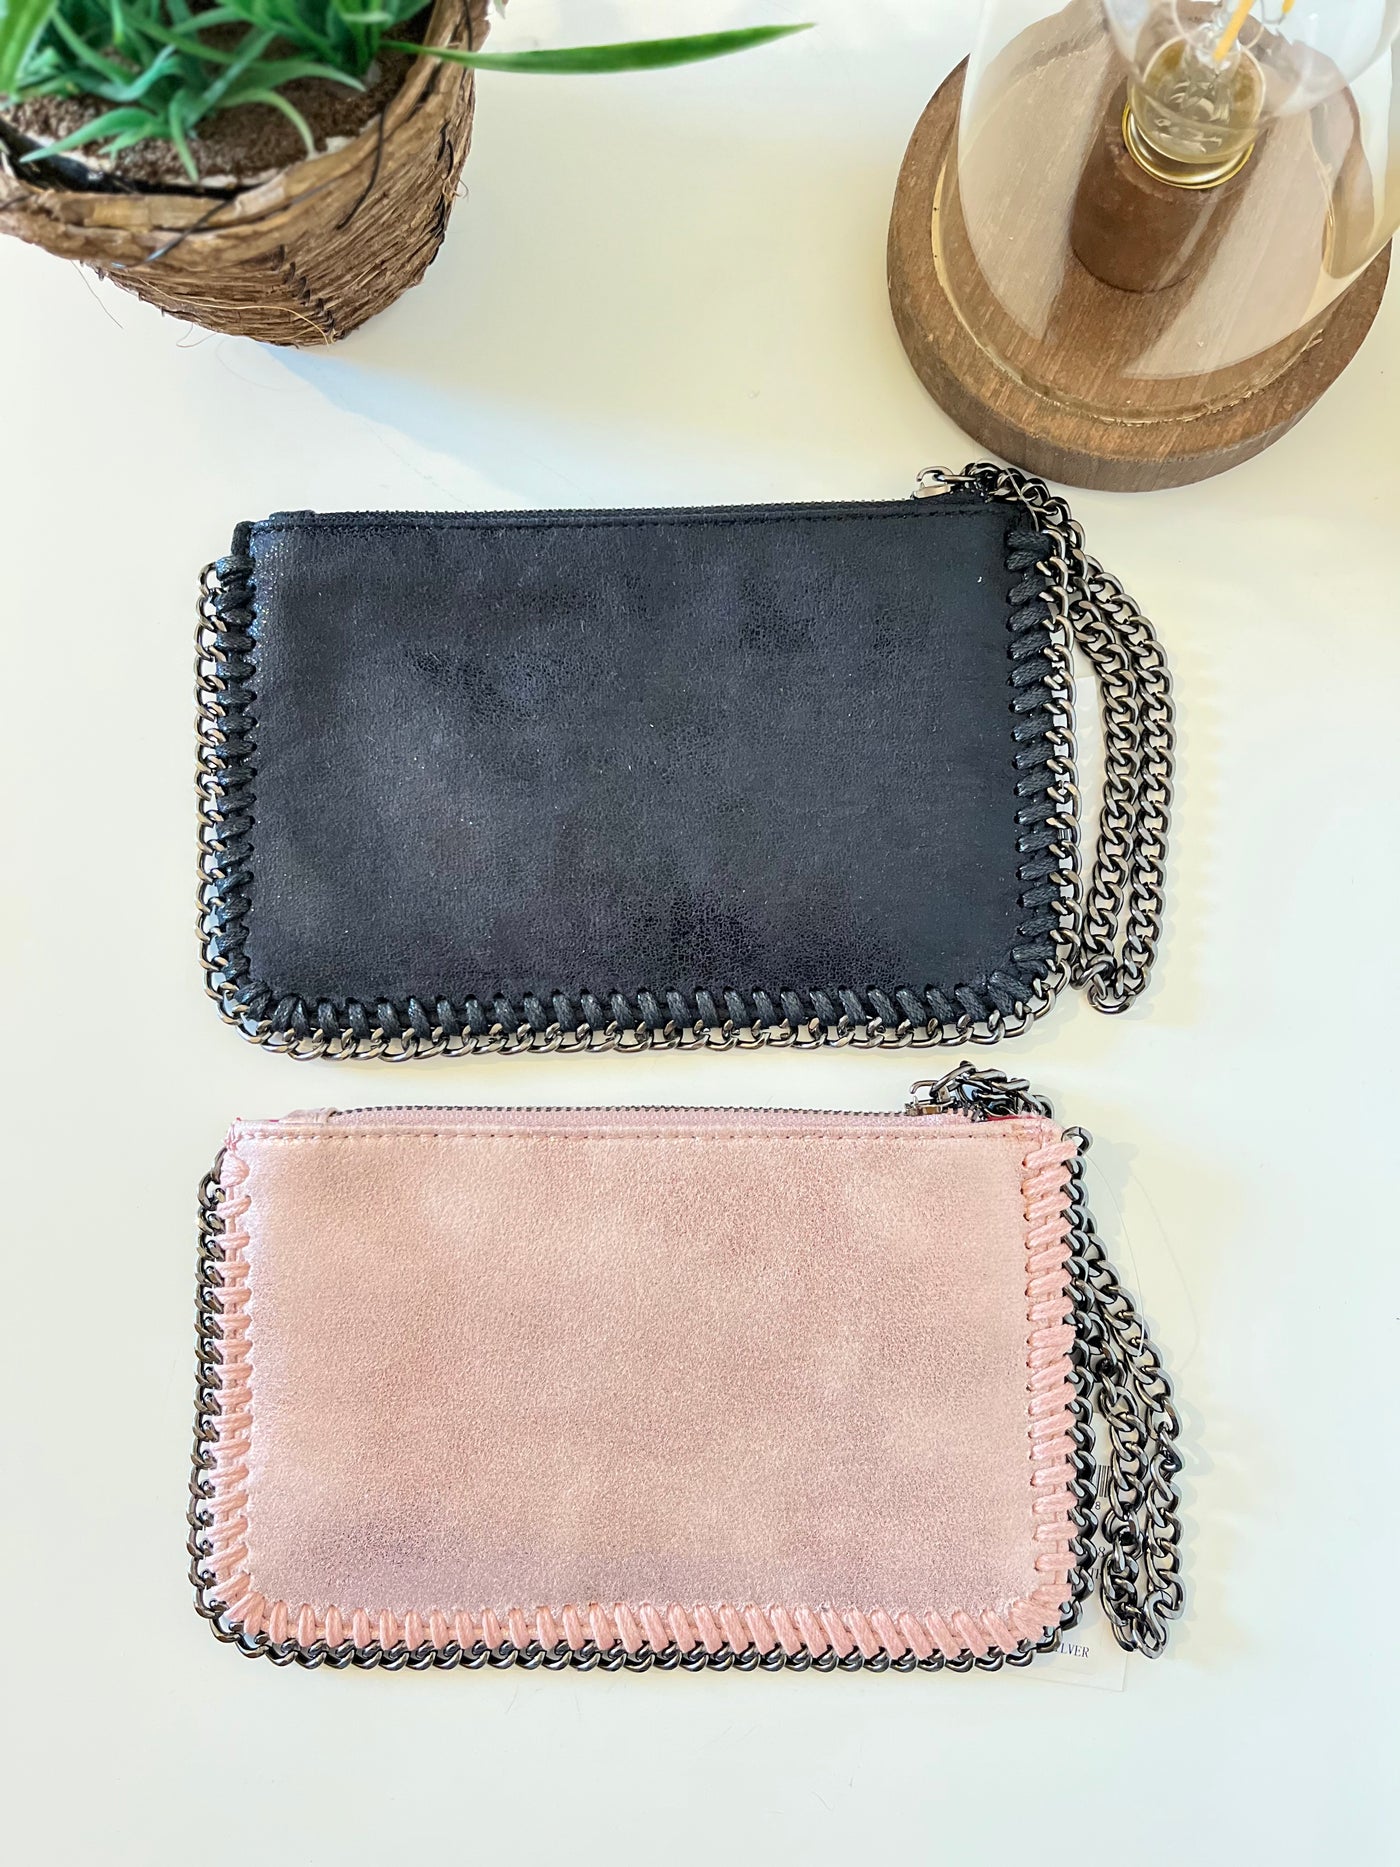 Showcase of colours of the Faux Suede Chain Clutch Bags